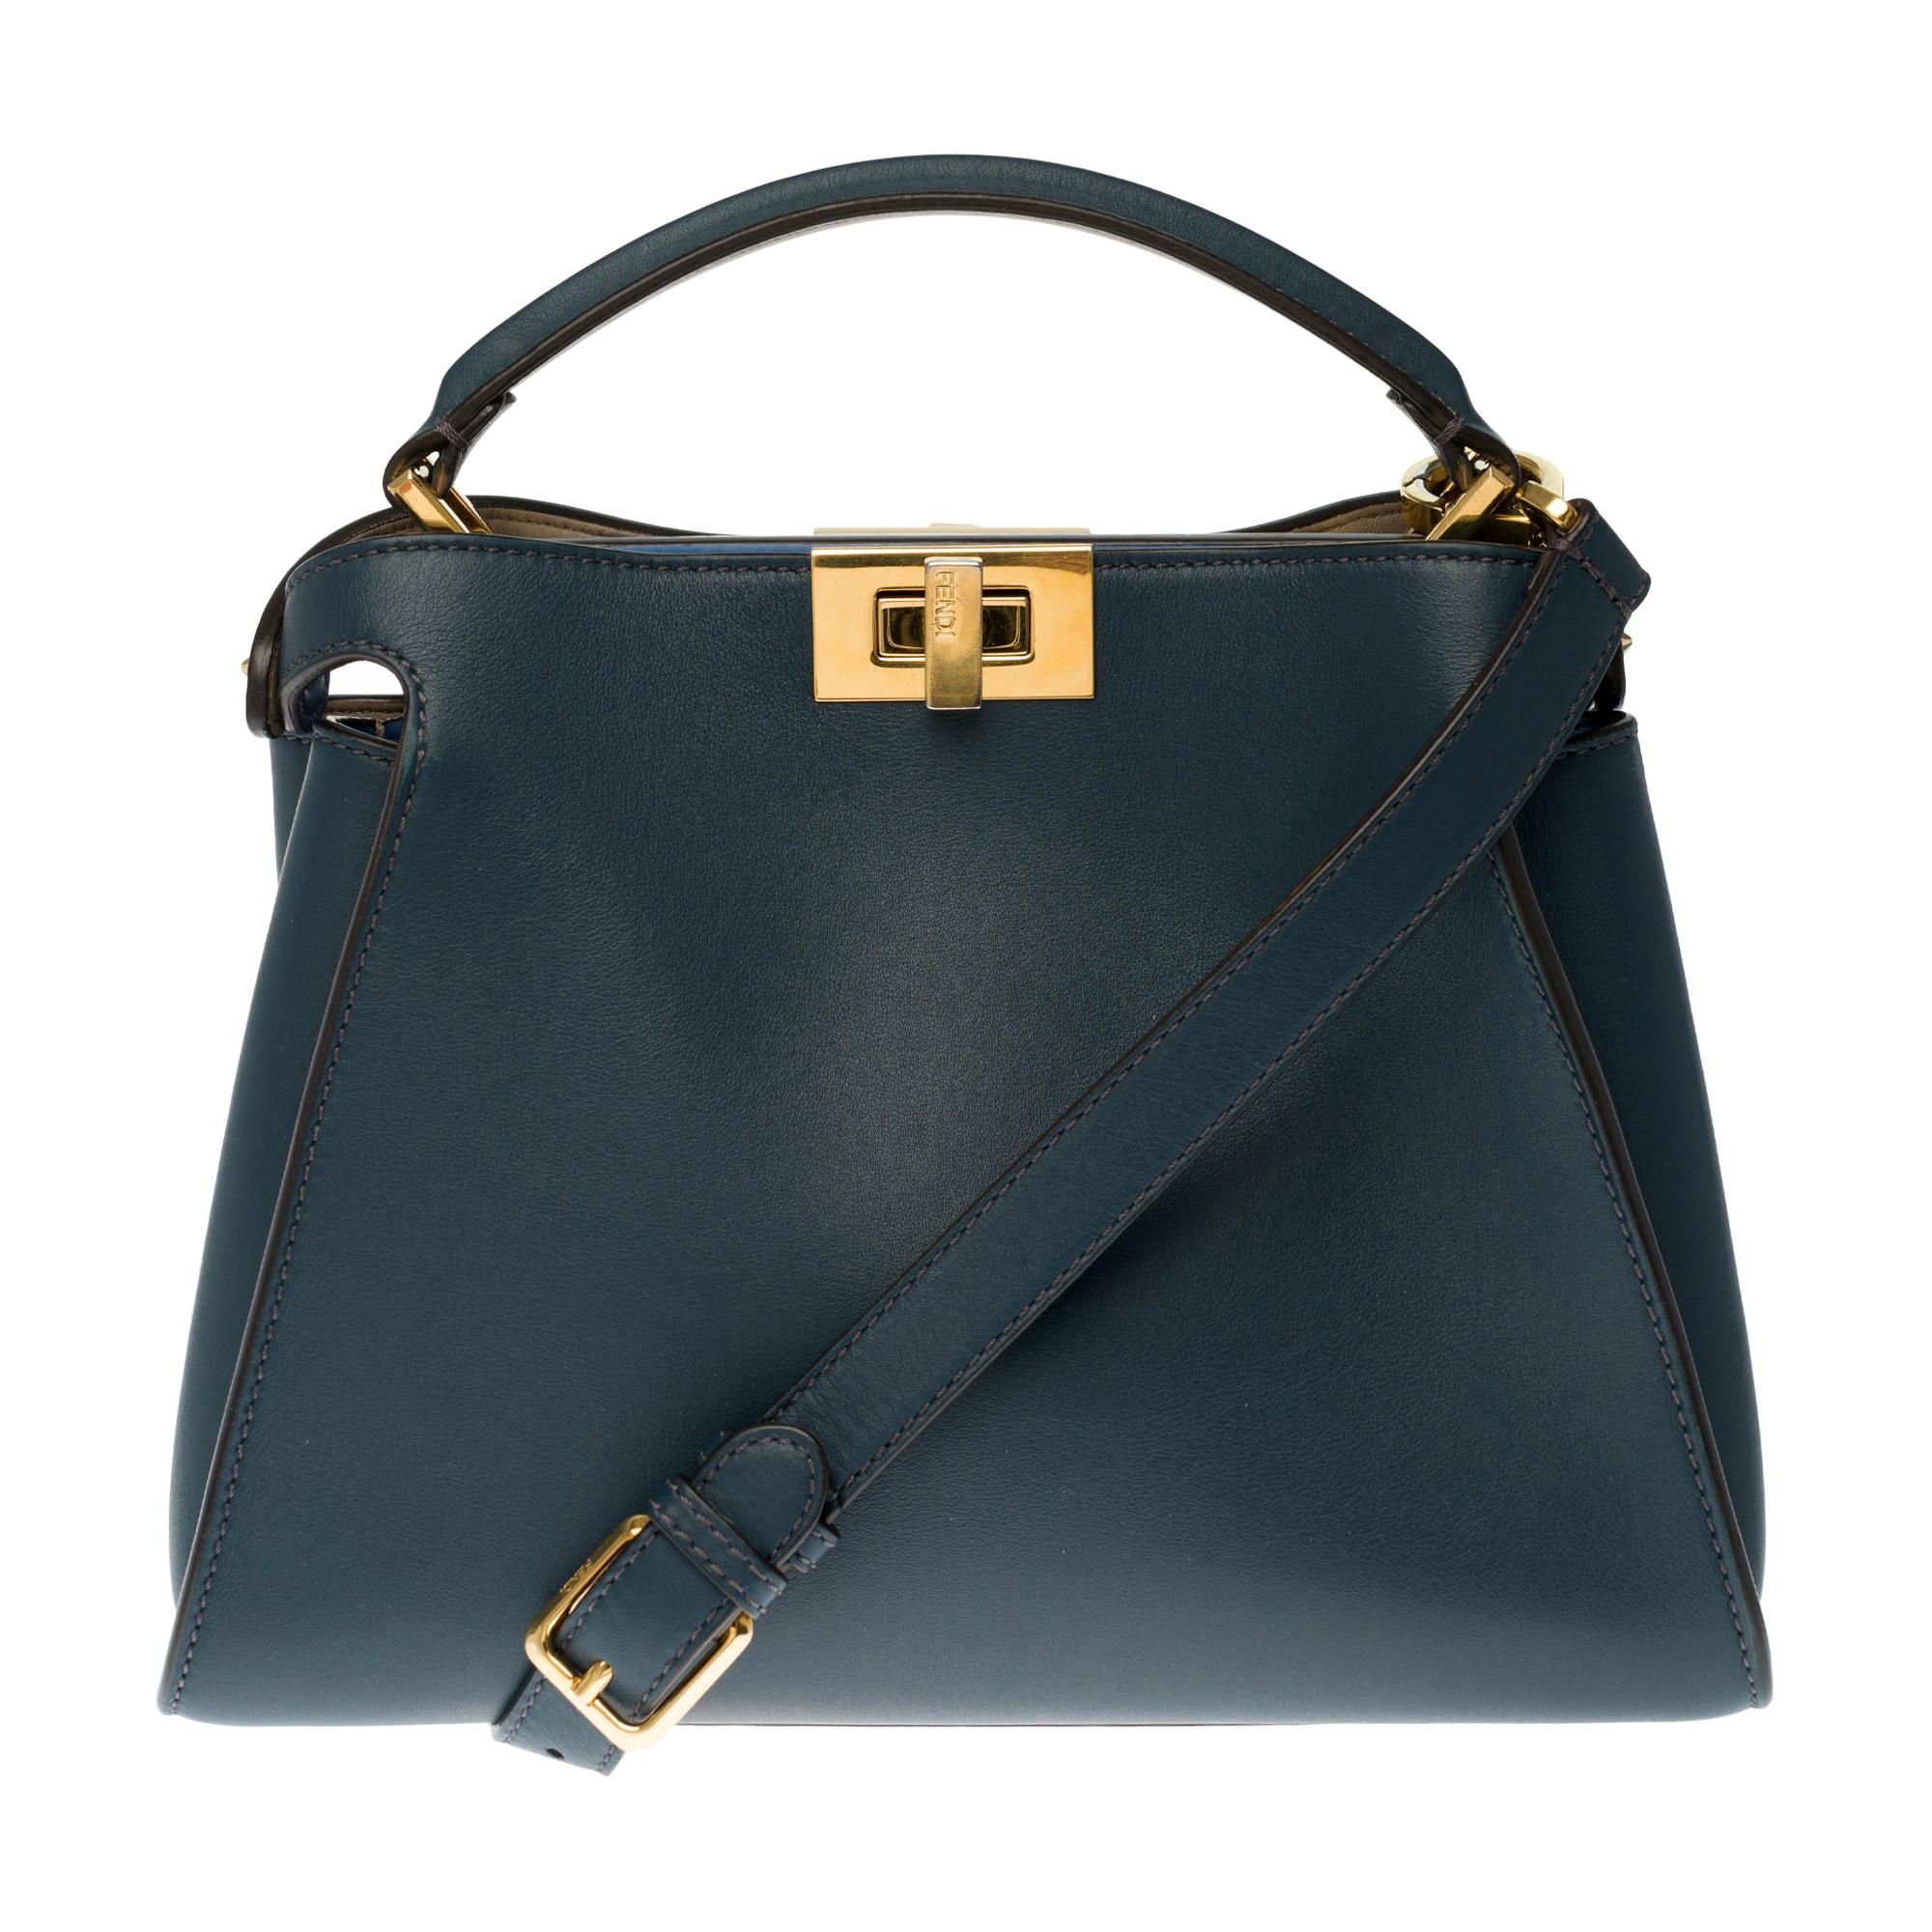 Fendi Peekaboo shoulder bag with strap in blue leather and gold hardware 